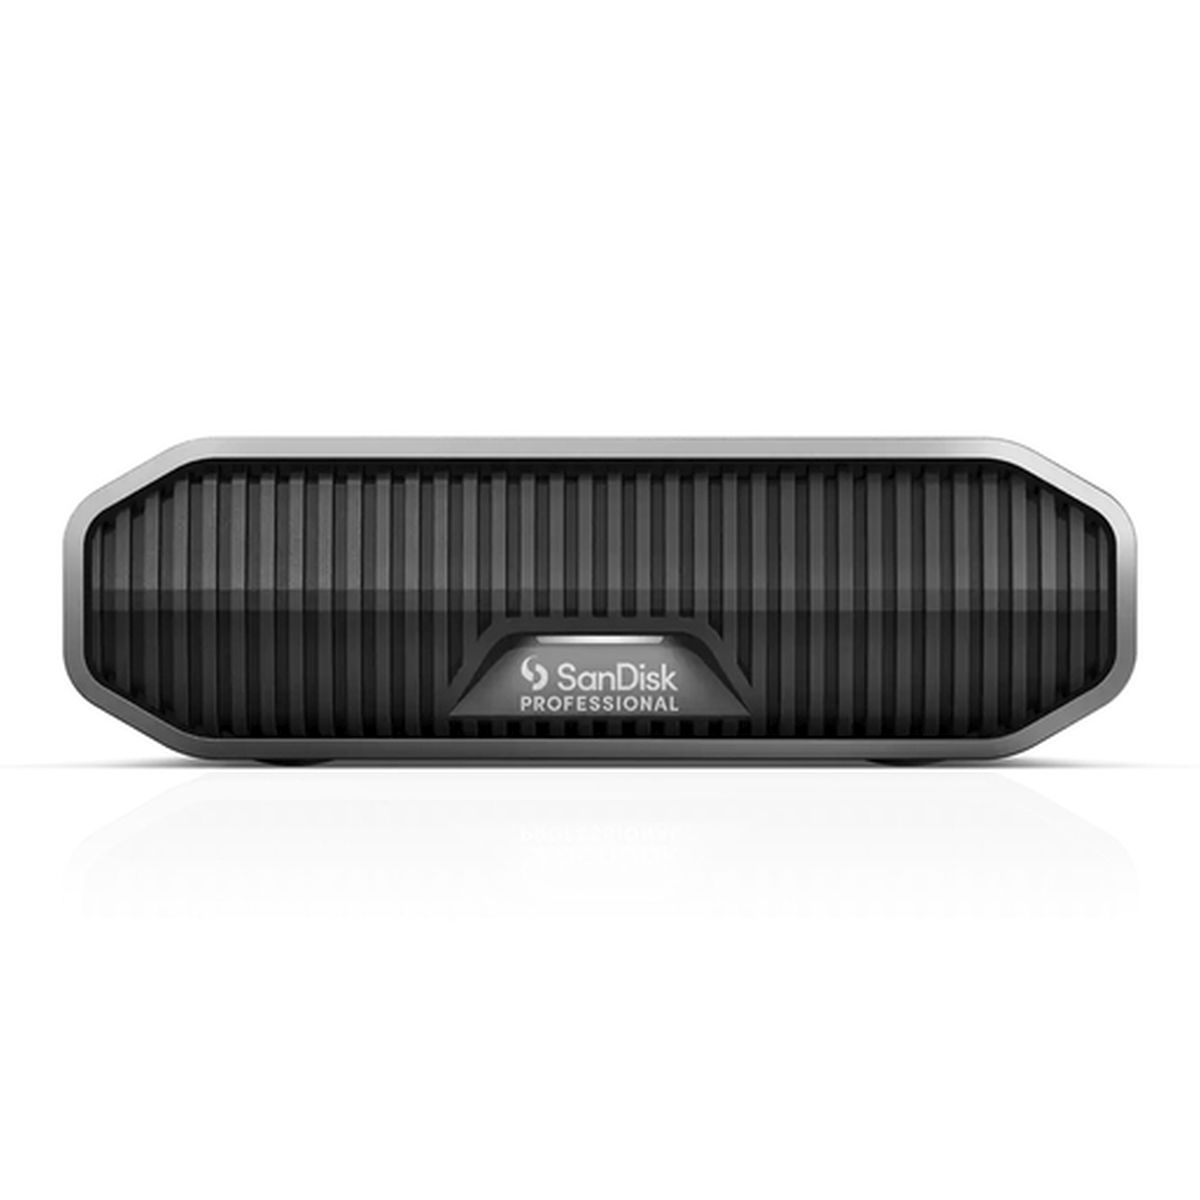 SanDisk Professional 12 TB G-Drive space grey, mobile HDD